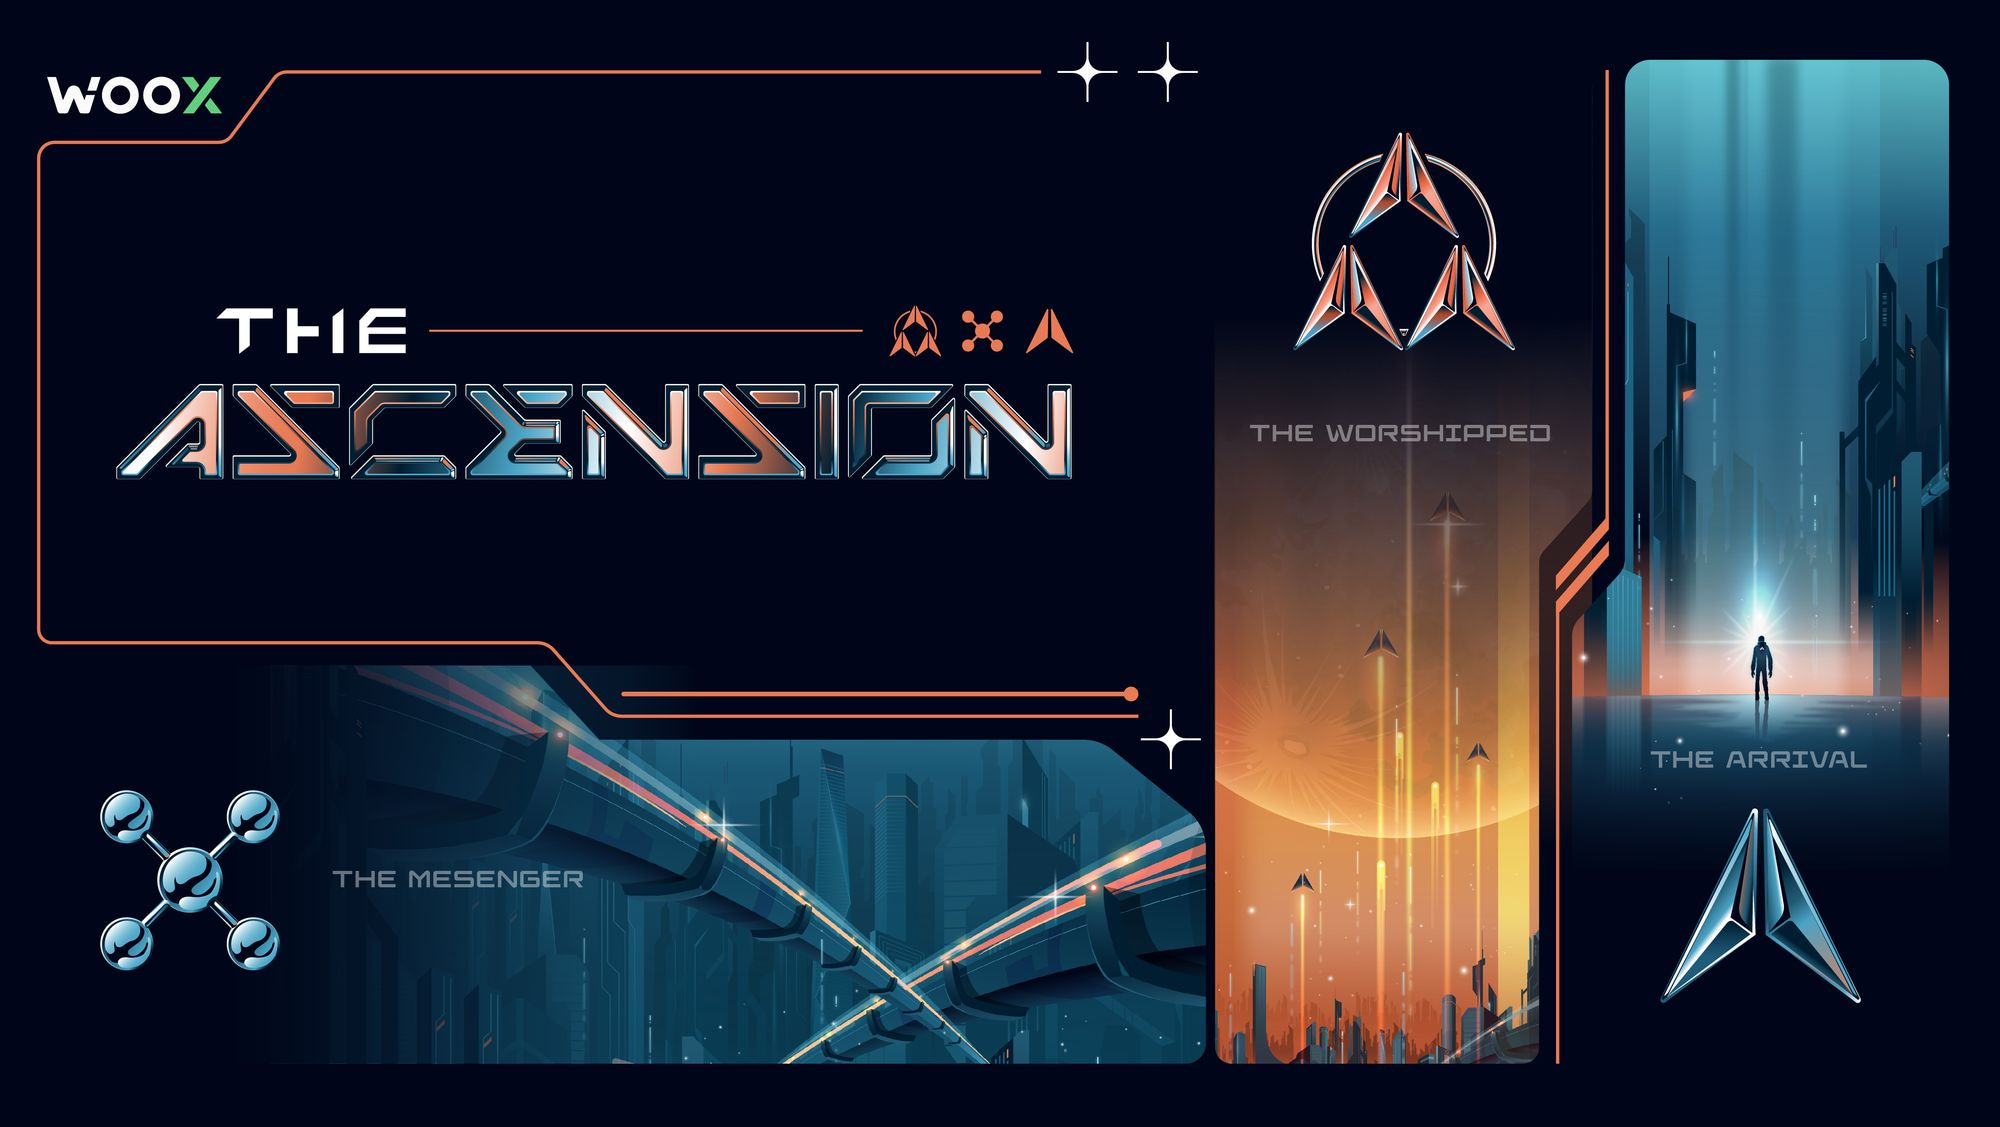 The Ascension - Meet the winners